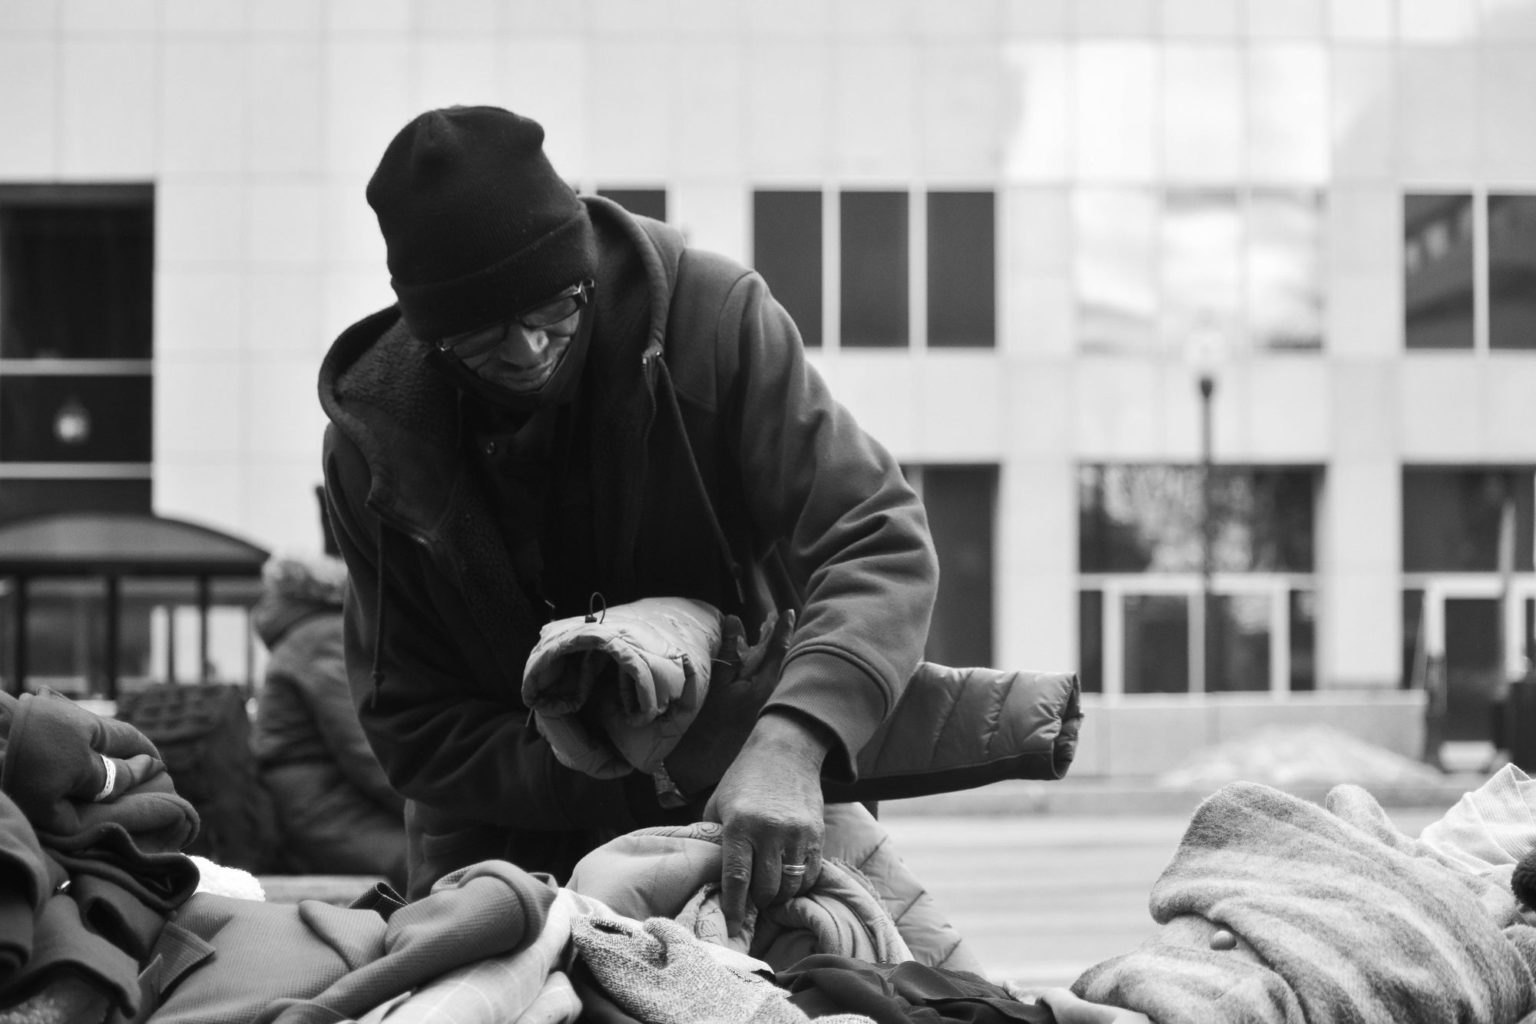 Cash Relief for the Homeless